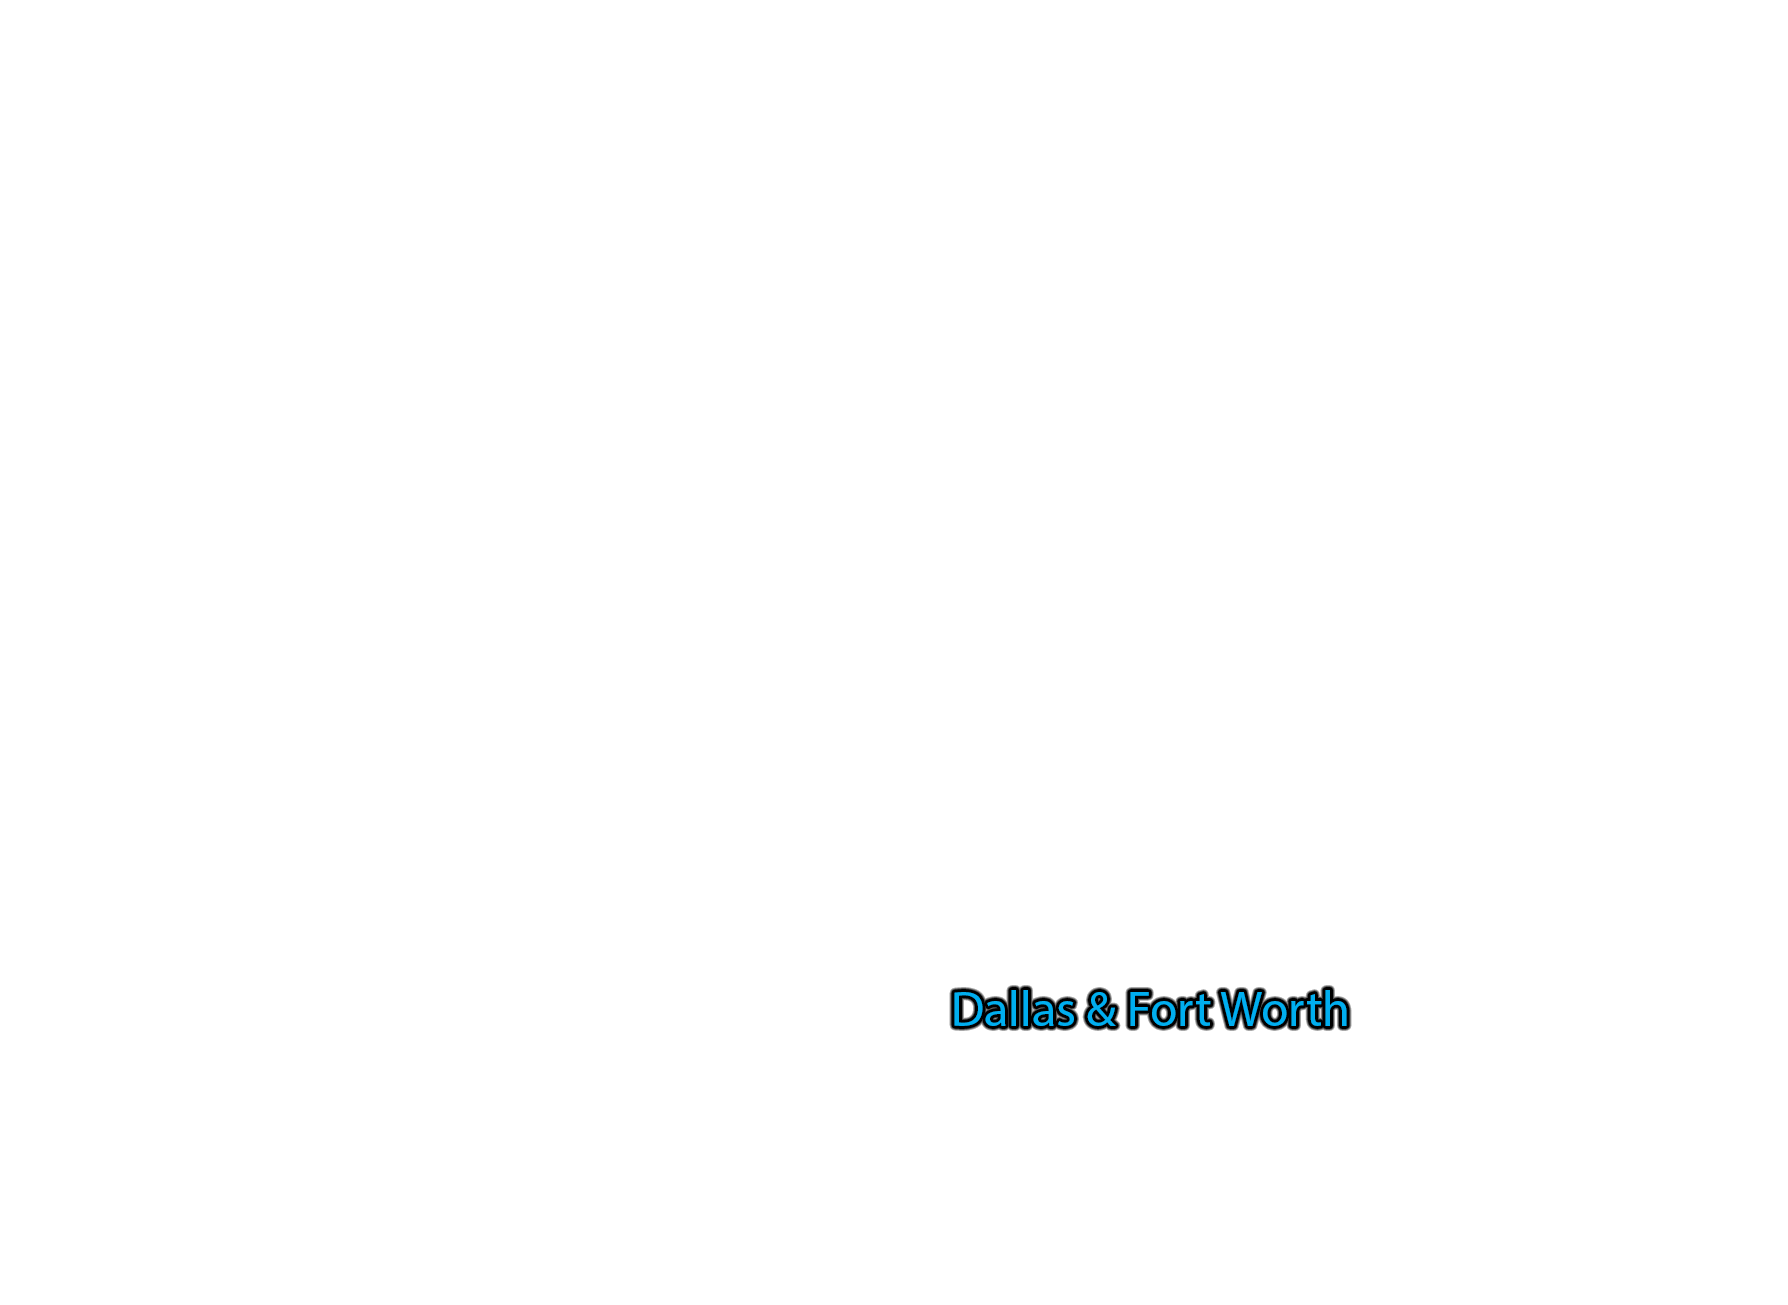 Dallas-&-Fort-Worth label with glow